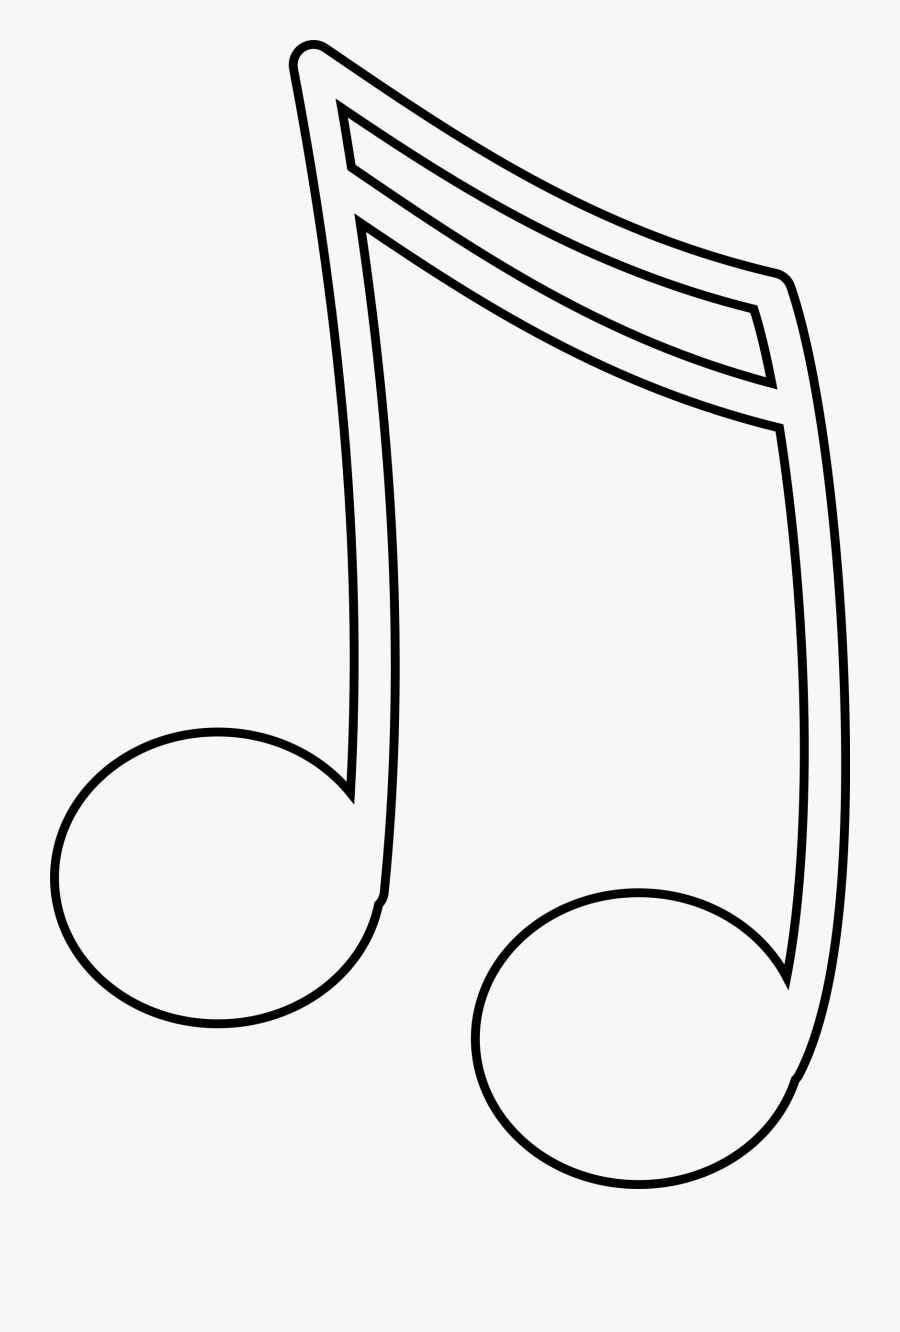 Transparent Musical Notes Png - White Music Note Clipart, Transparent Clipart